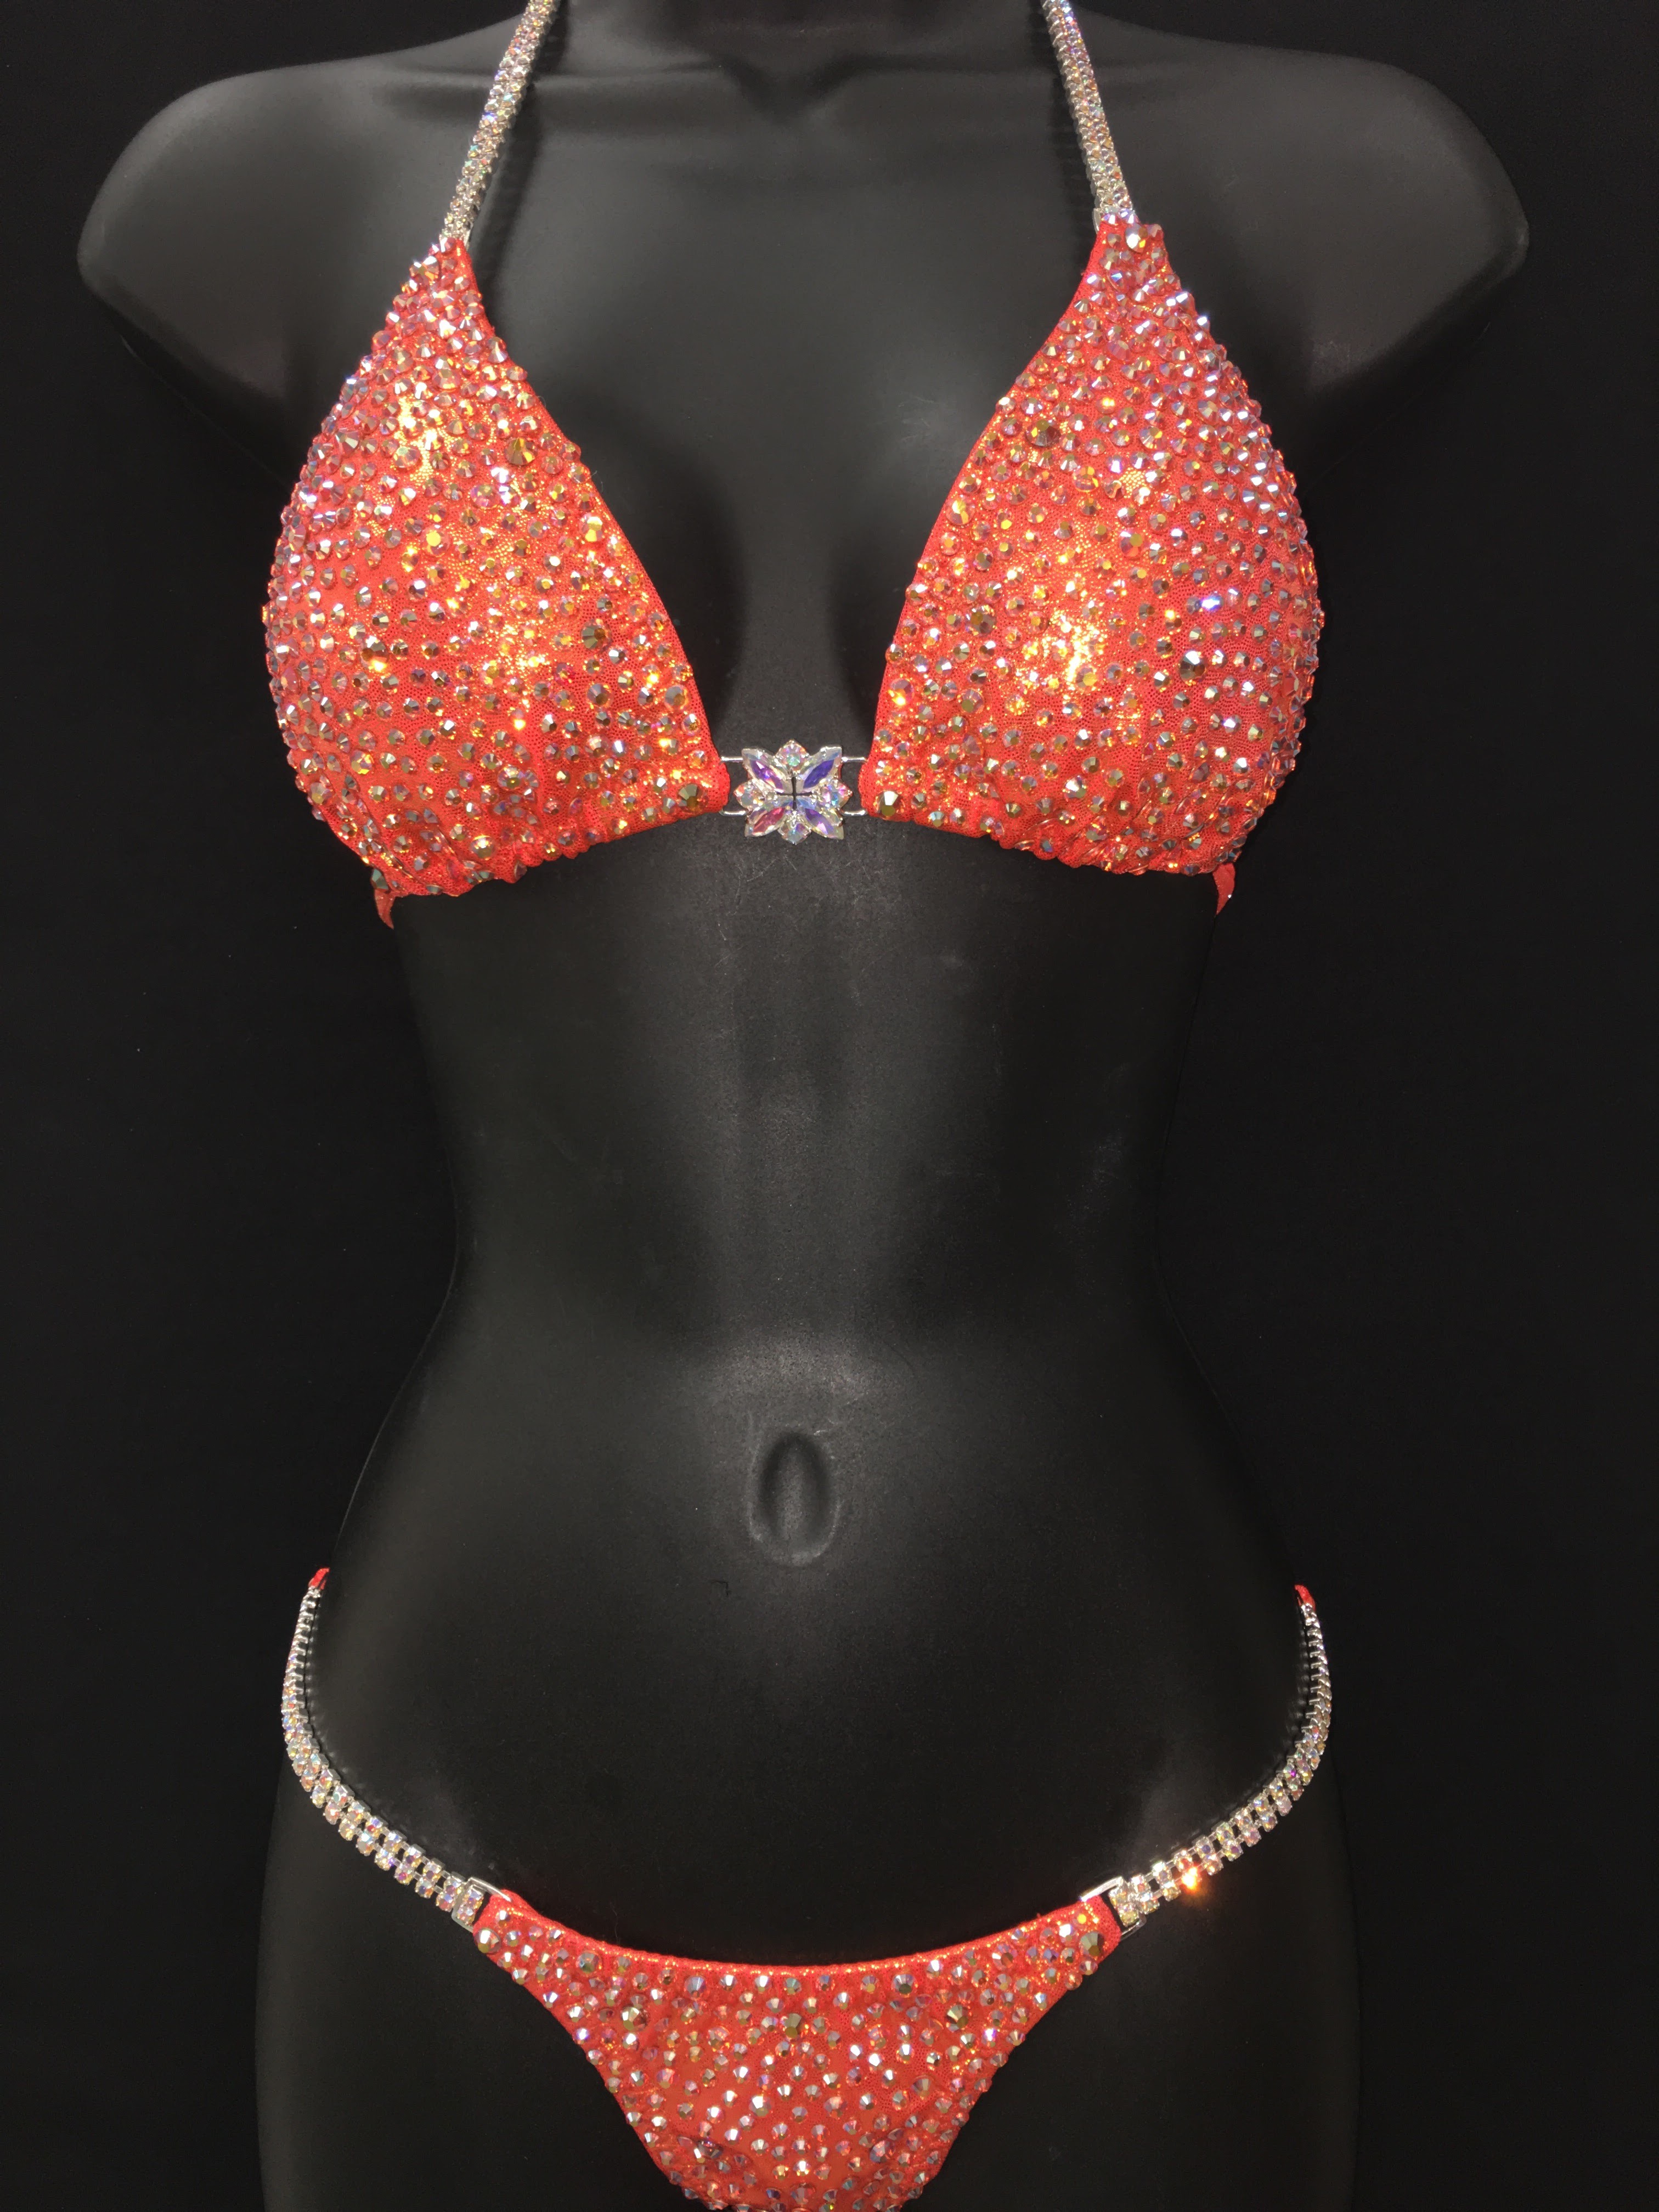 $700 -$900
Hot orange smothered in multi size rhinestones all one color